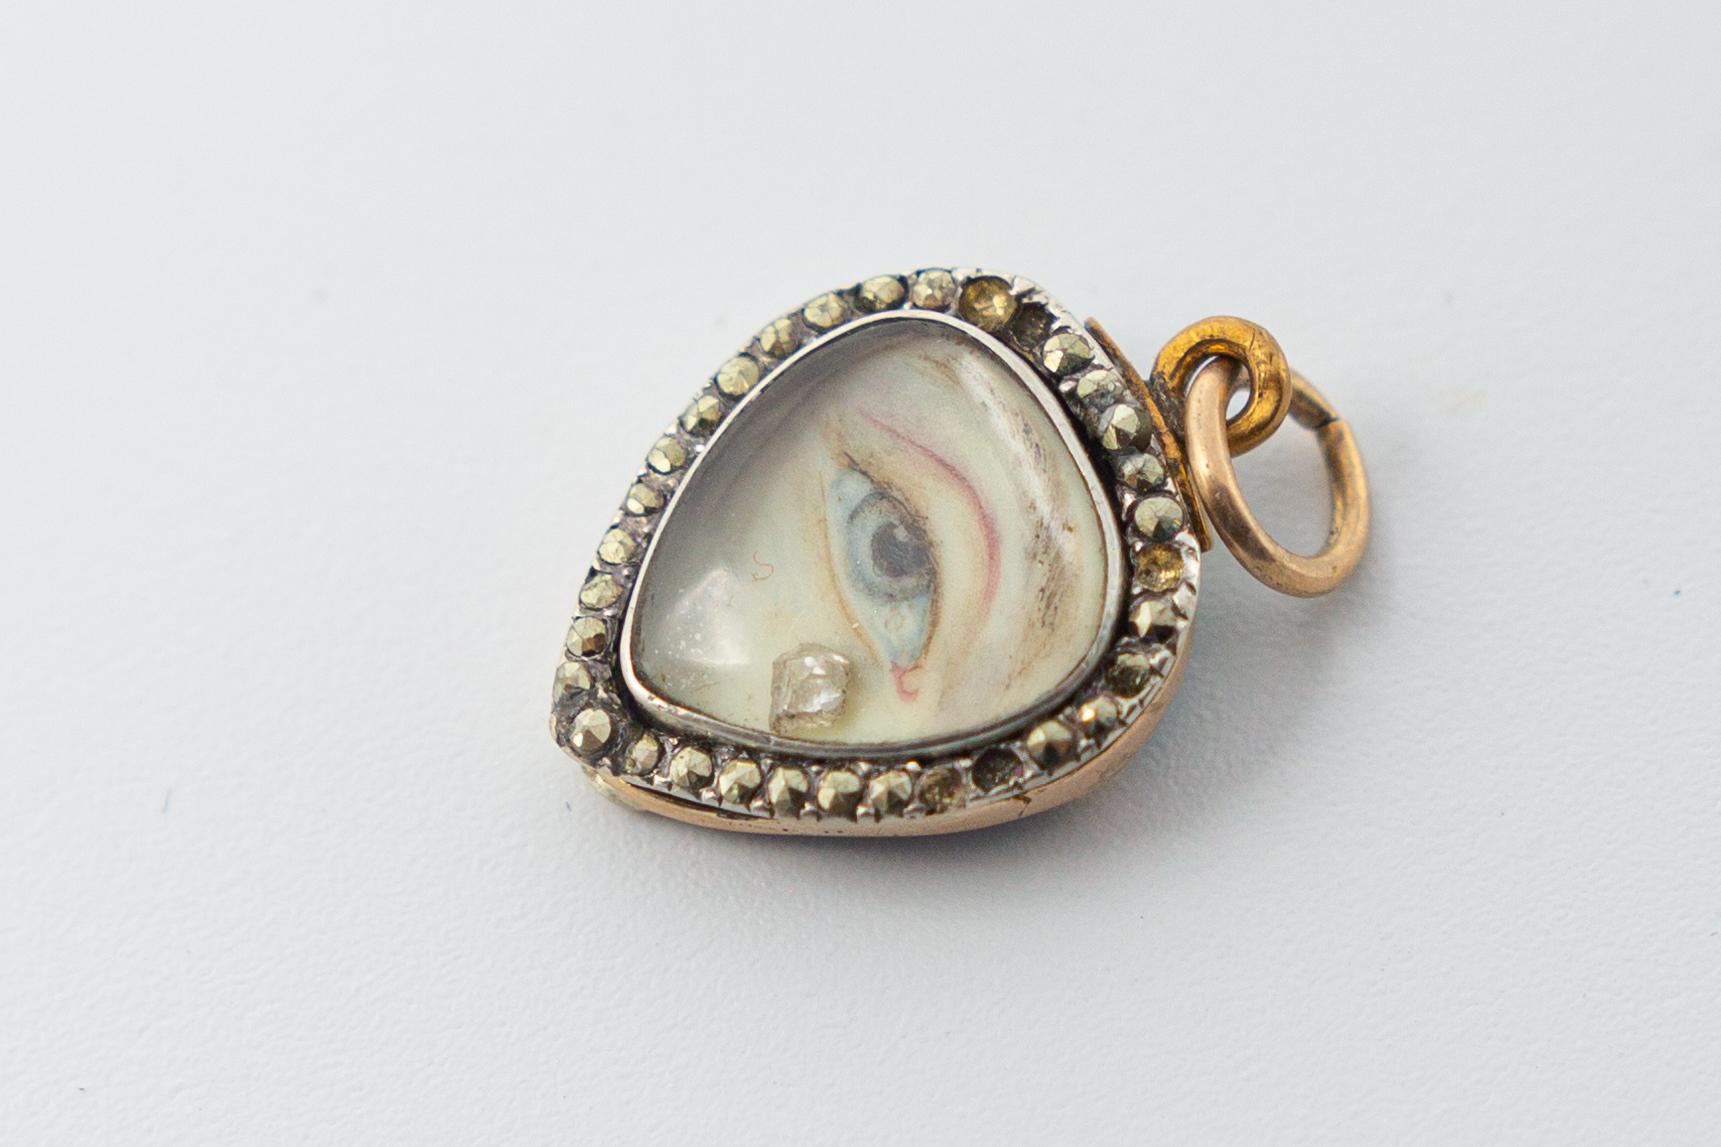 Antique Georgian lovers eye with a diamond tear drop mourning heart pendant. This lovers eye finely painted and appears to be on wafer. The pendant is 9k gold and silver with a blue enamel back, the border is set with cut steels which sparkle really